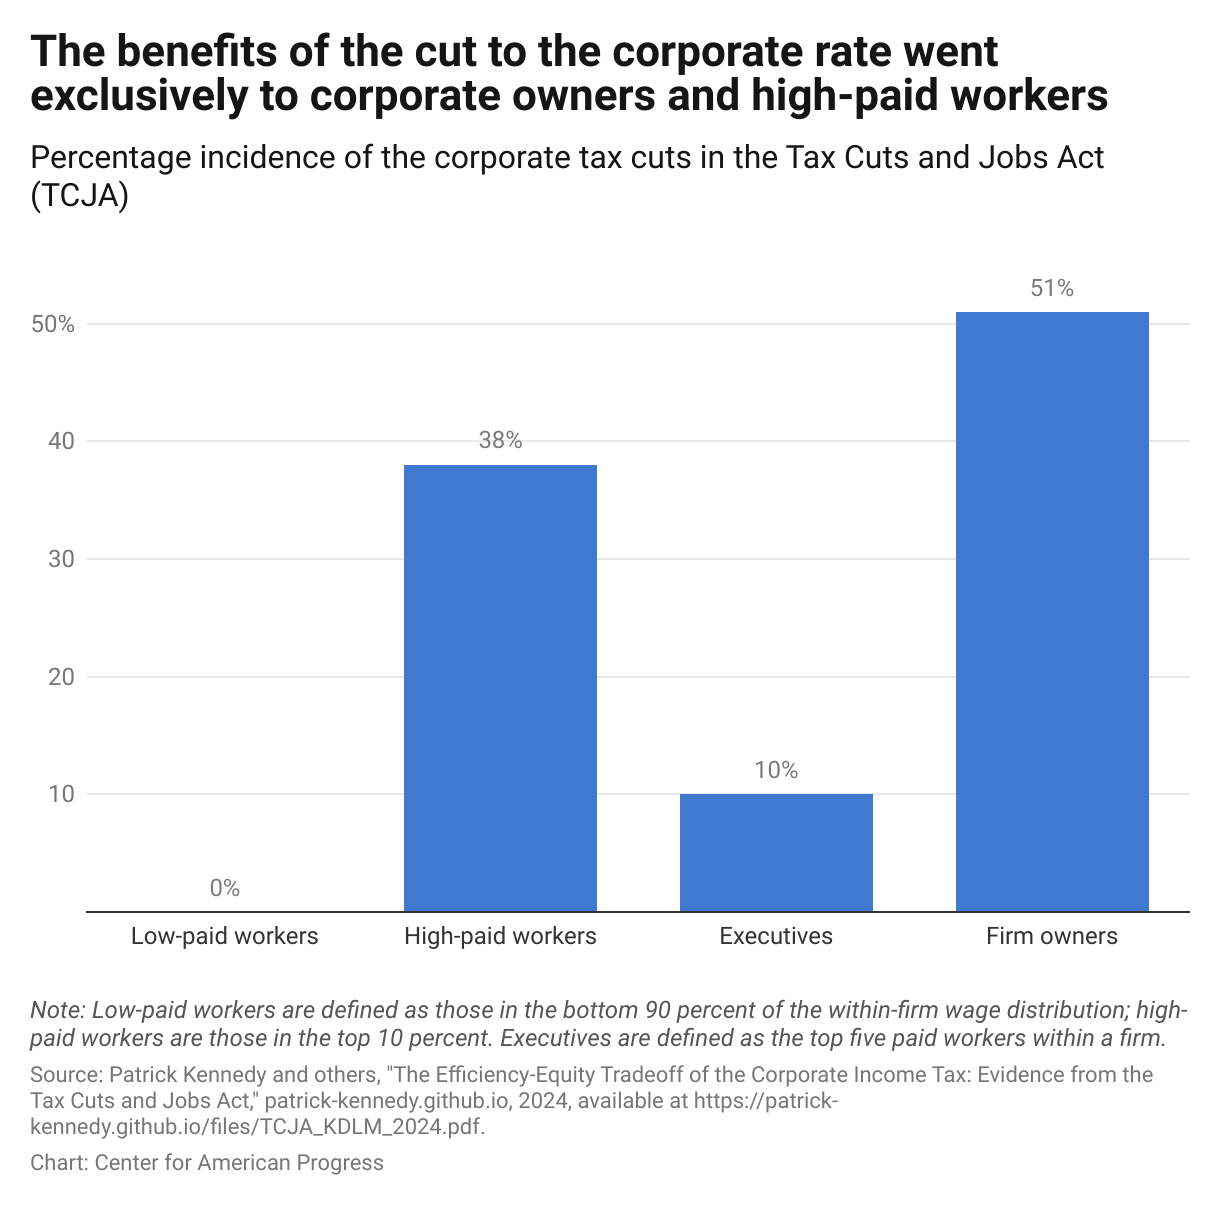 Bar chart showing the distribution of the 2017 law's corporate tax cut, which shows that most of the benefits went to firm owners and high-paid workers.